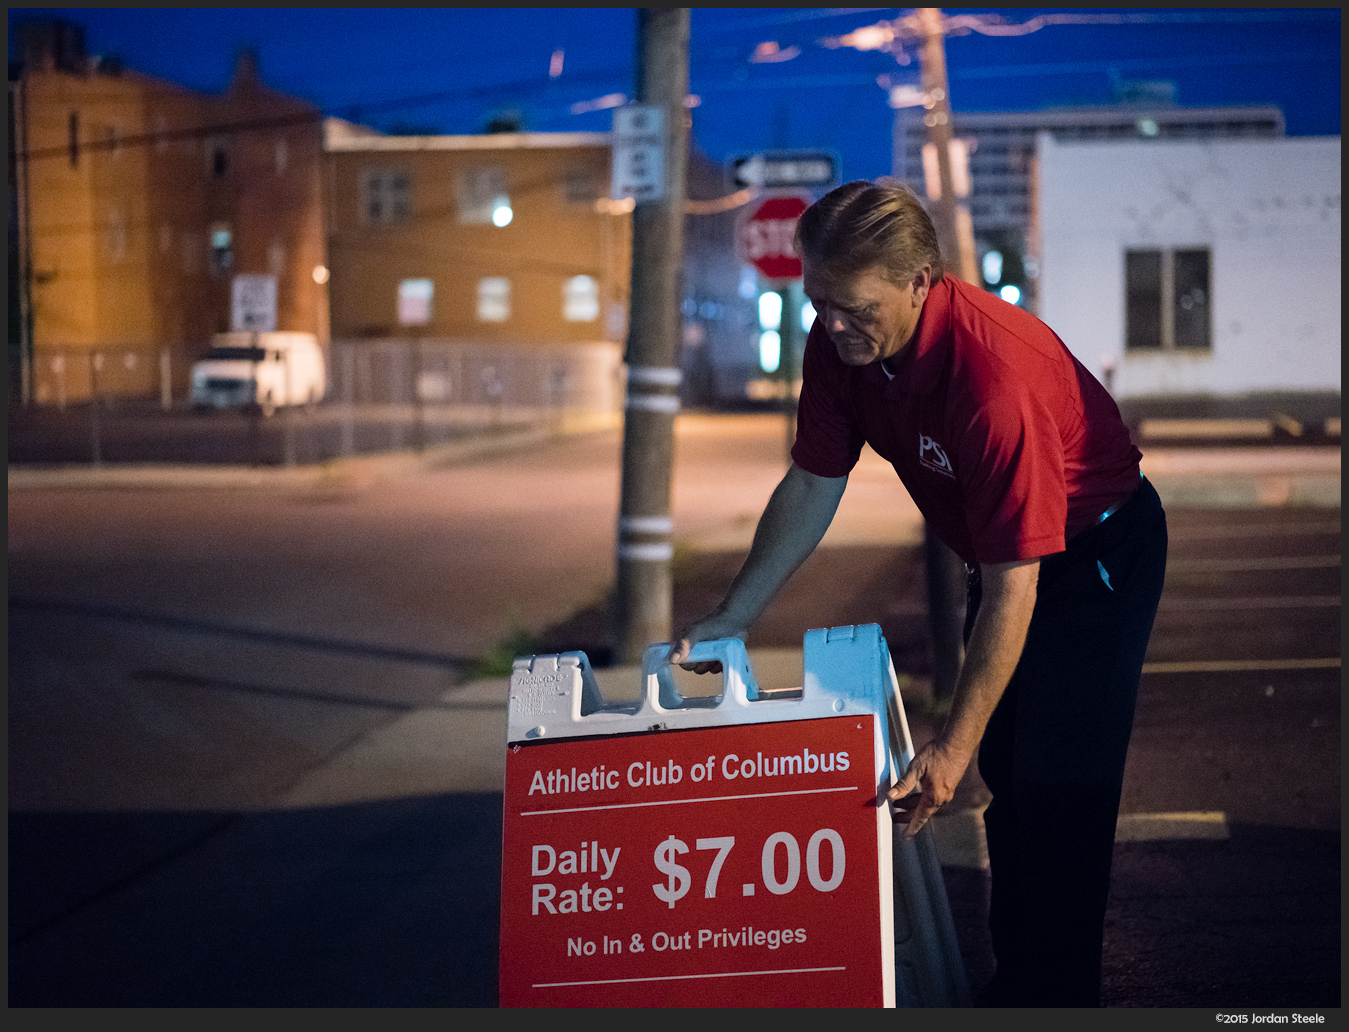 Parking Attendant - Sony A7R II with Zeiss FE 55mm f/1.8 @ f/1.8, 1/125s, ISO 12,800